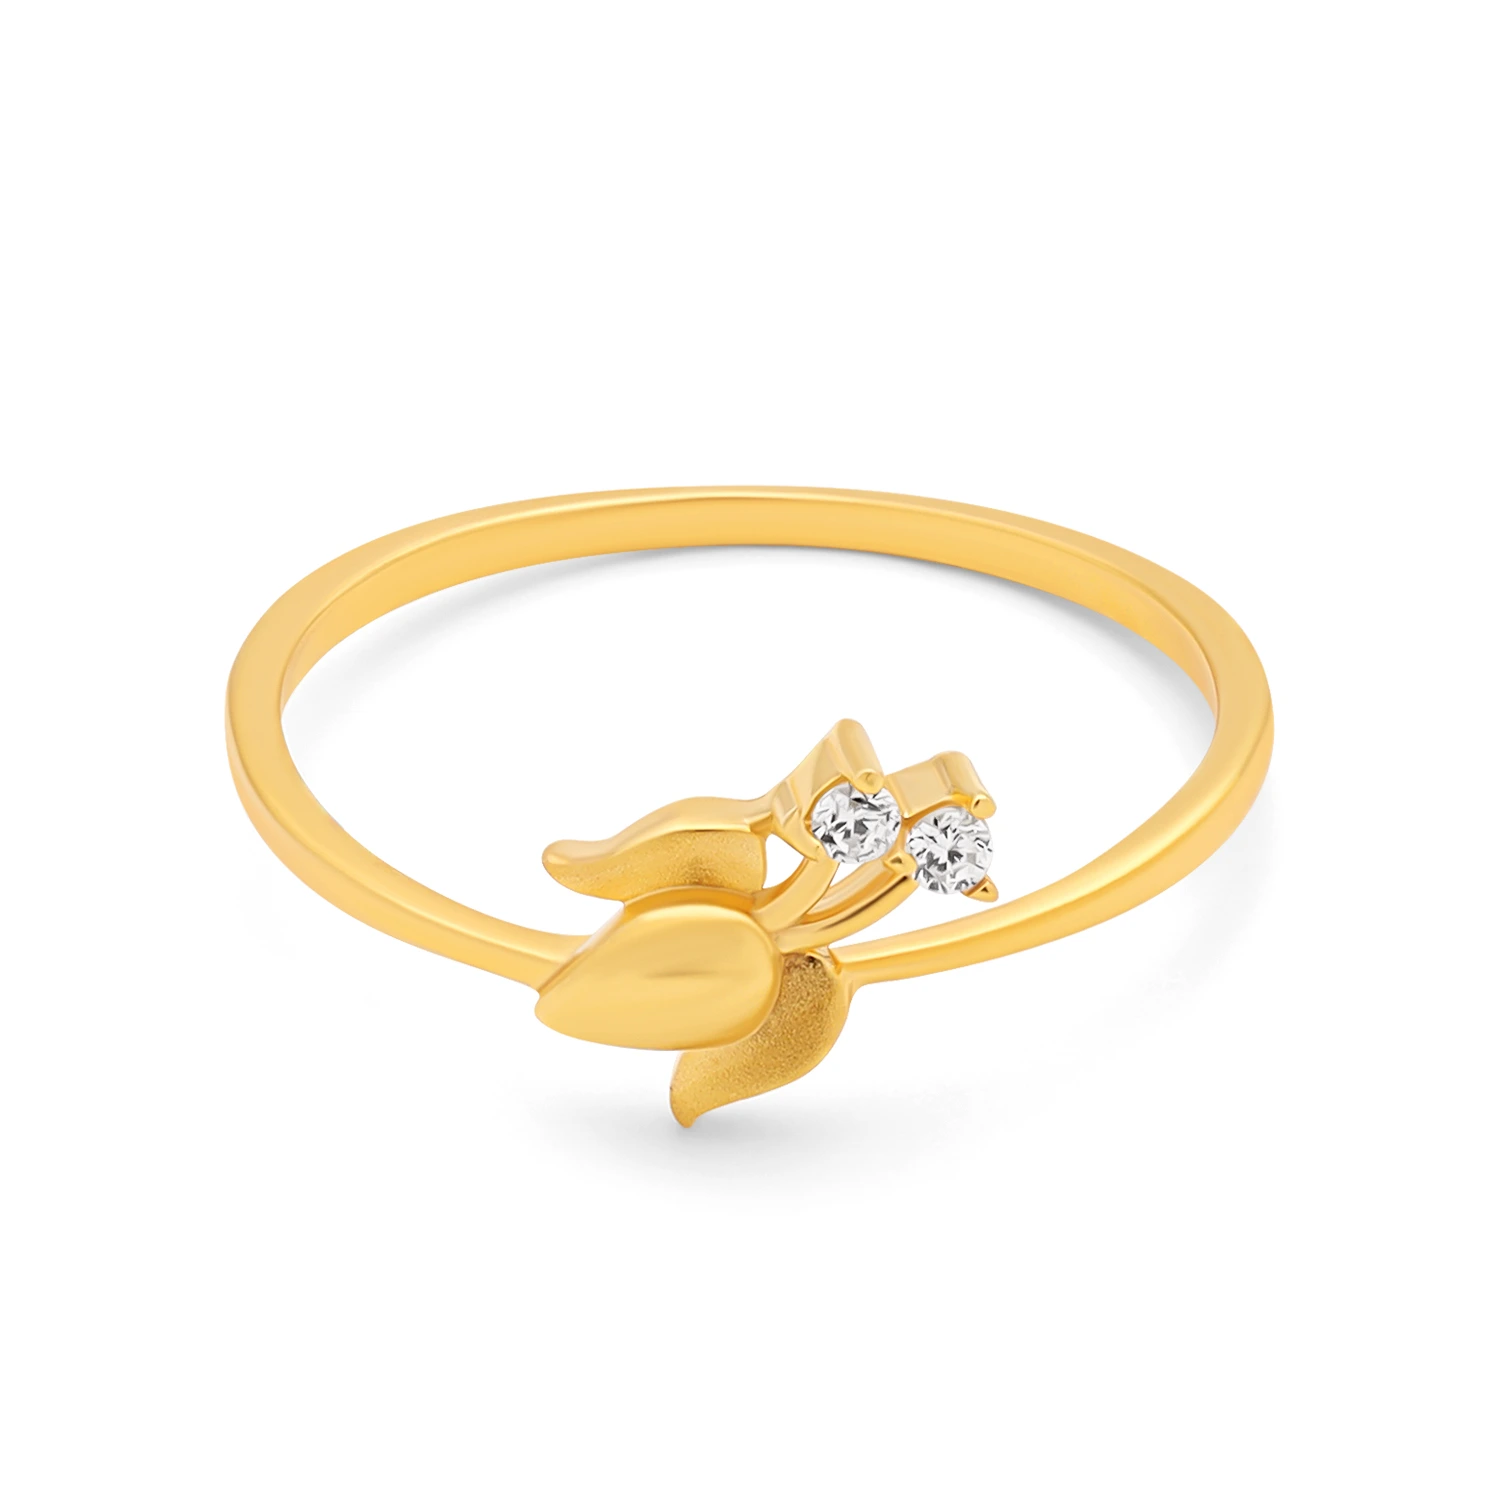 Buy Attractive Fashionable Gold Rings |GRT Jewellers